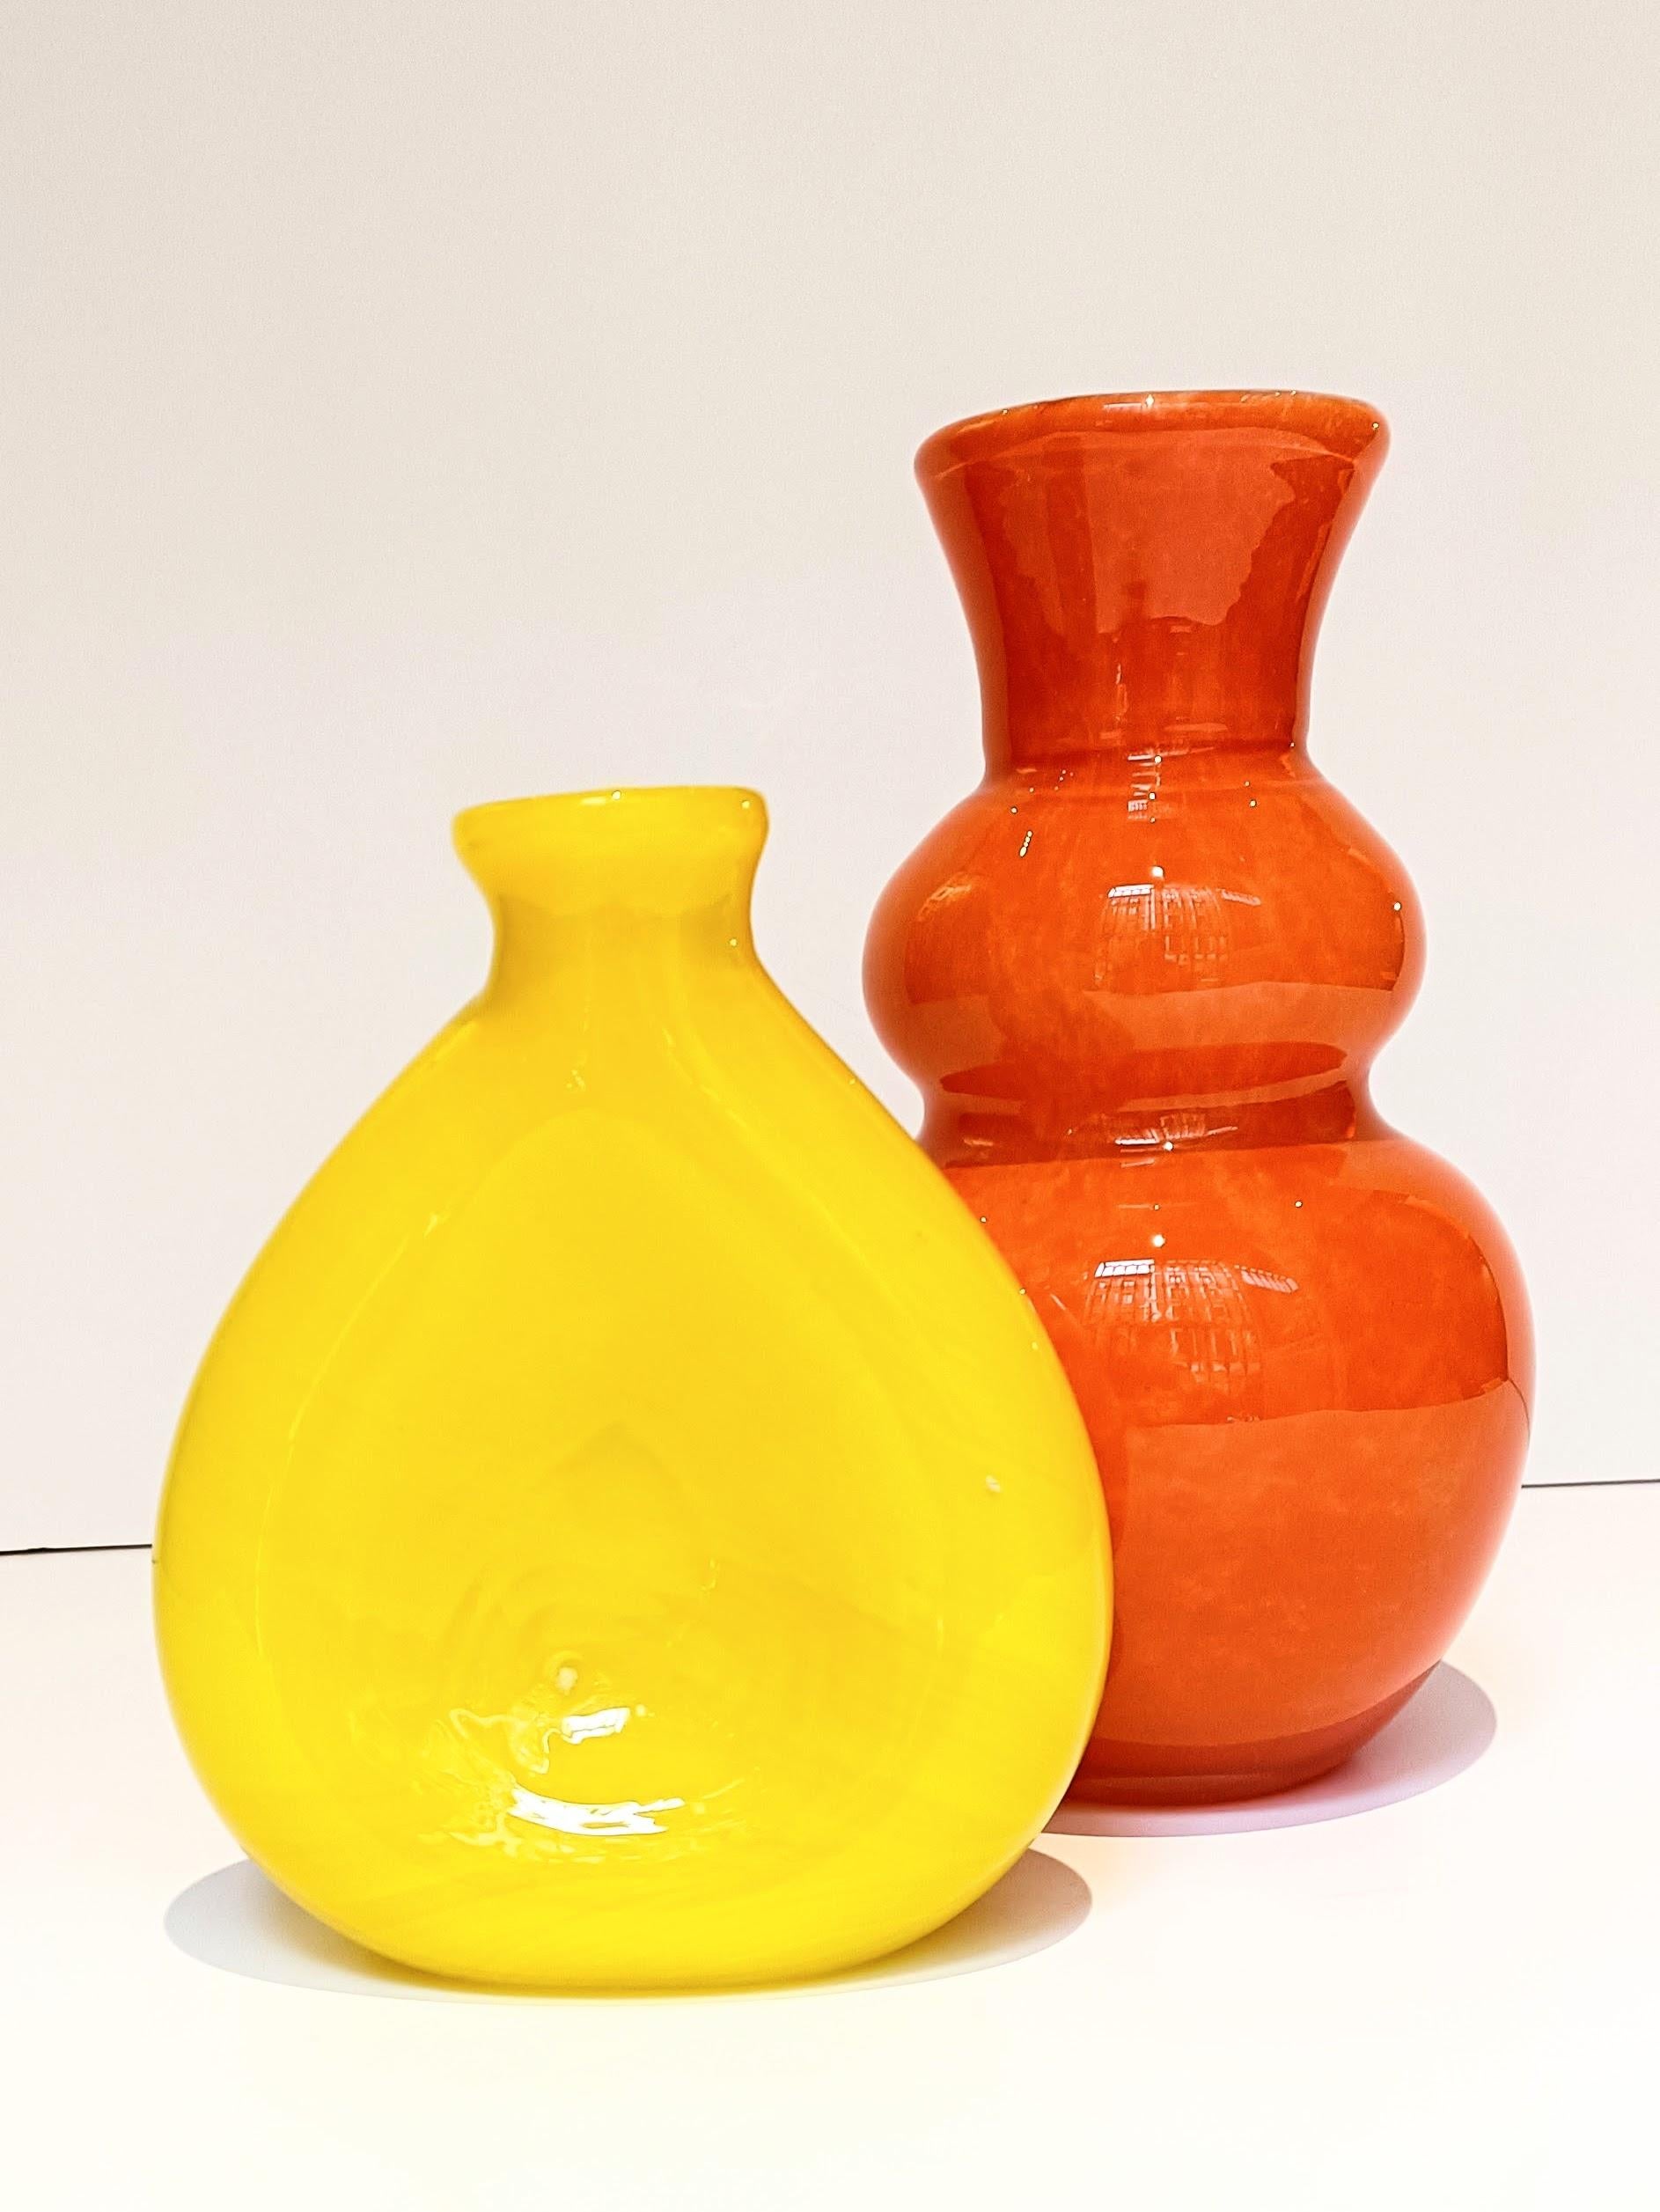 Pair of vintage Pop Art style Mid-Century Modern Murano glass vases. Their thick exterior layers in vibrant orange and yellow hues, along with the distinctive white casing on the orange vase, add a striking visual appeal. They were handcrafted in